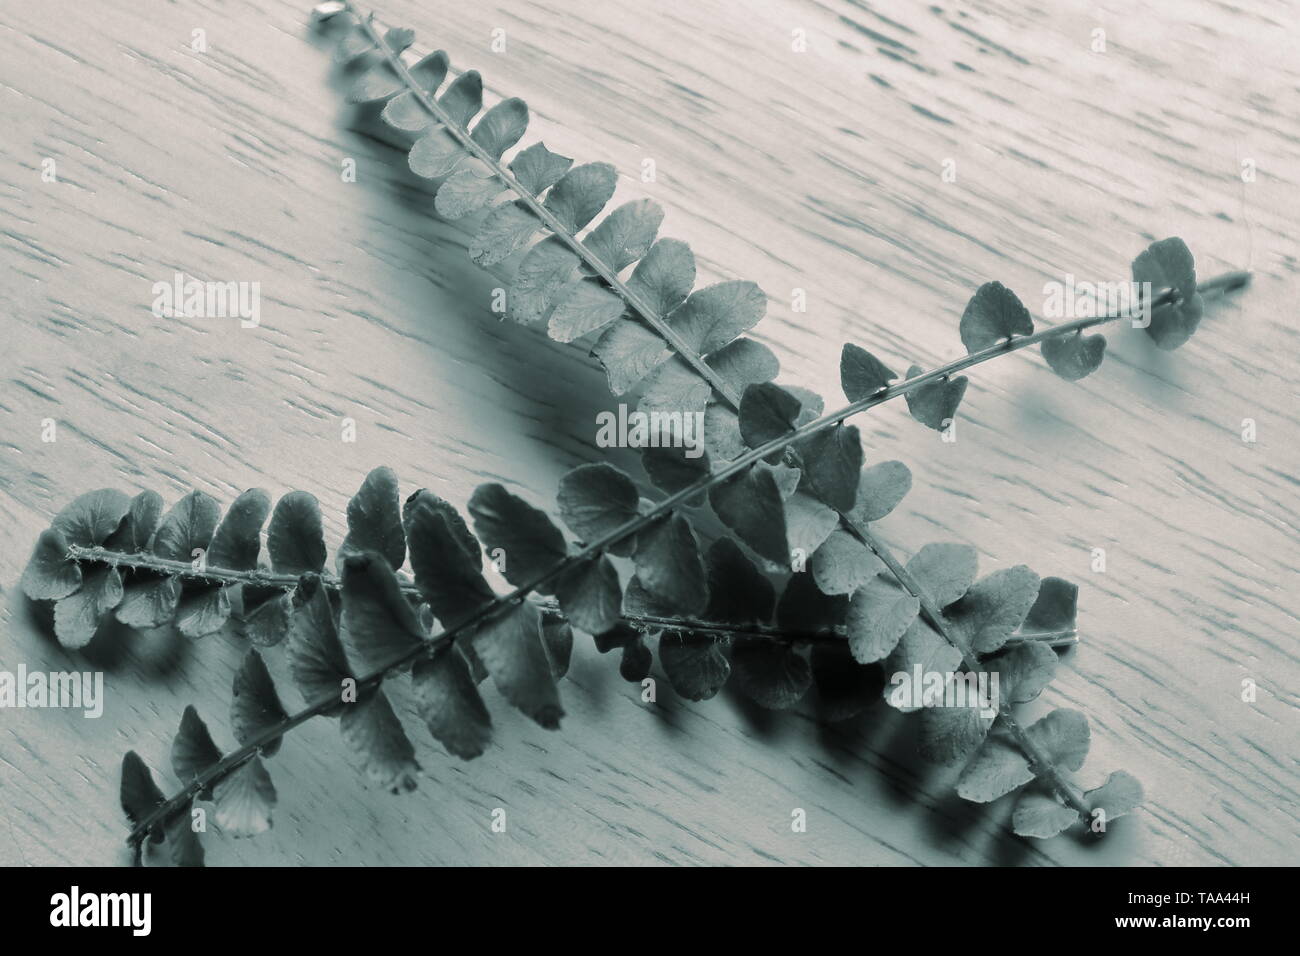 Split-toned black and white image of crisscrossing fern leaves on a wooden surface; intended to color coordinate with popular brown and green paint co Stock Photo